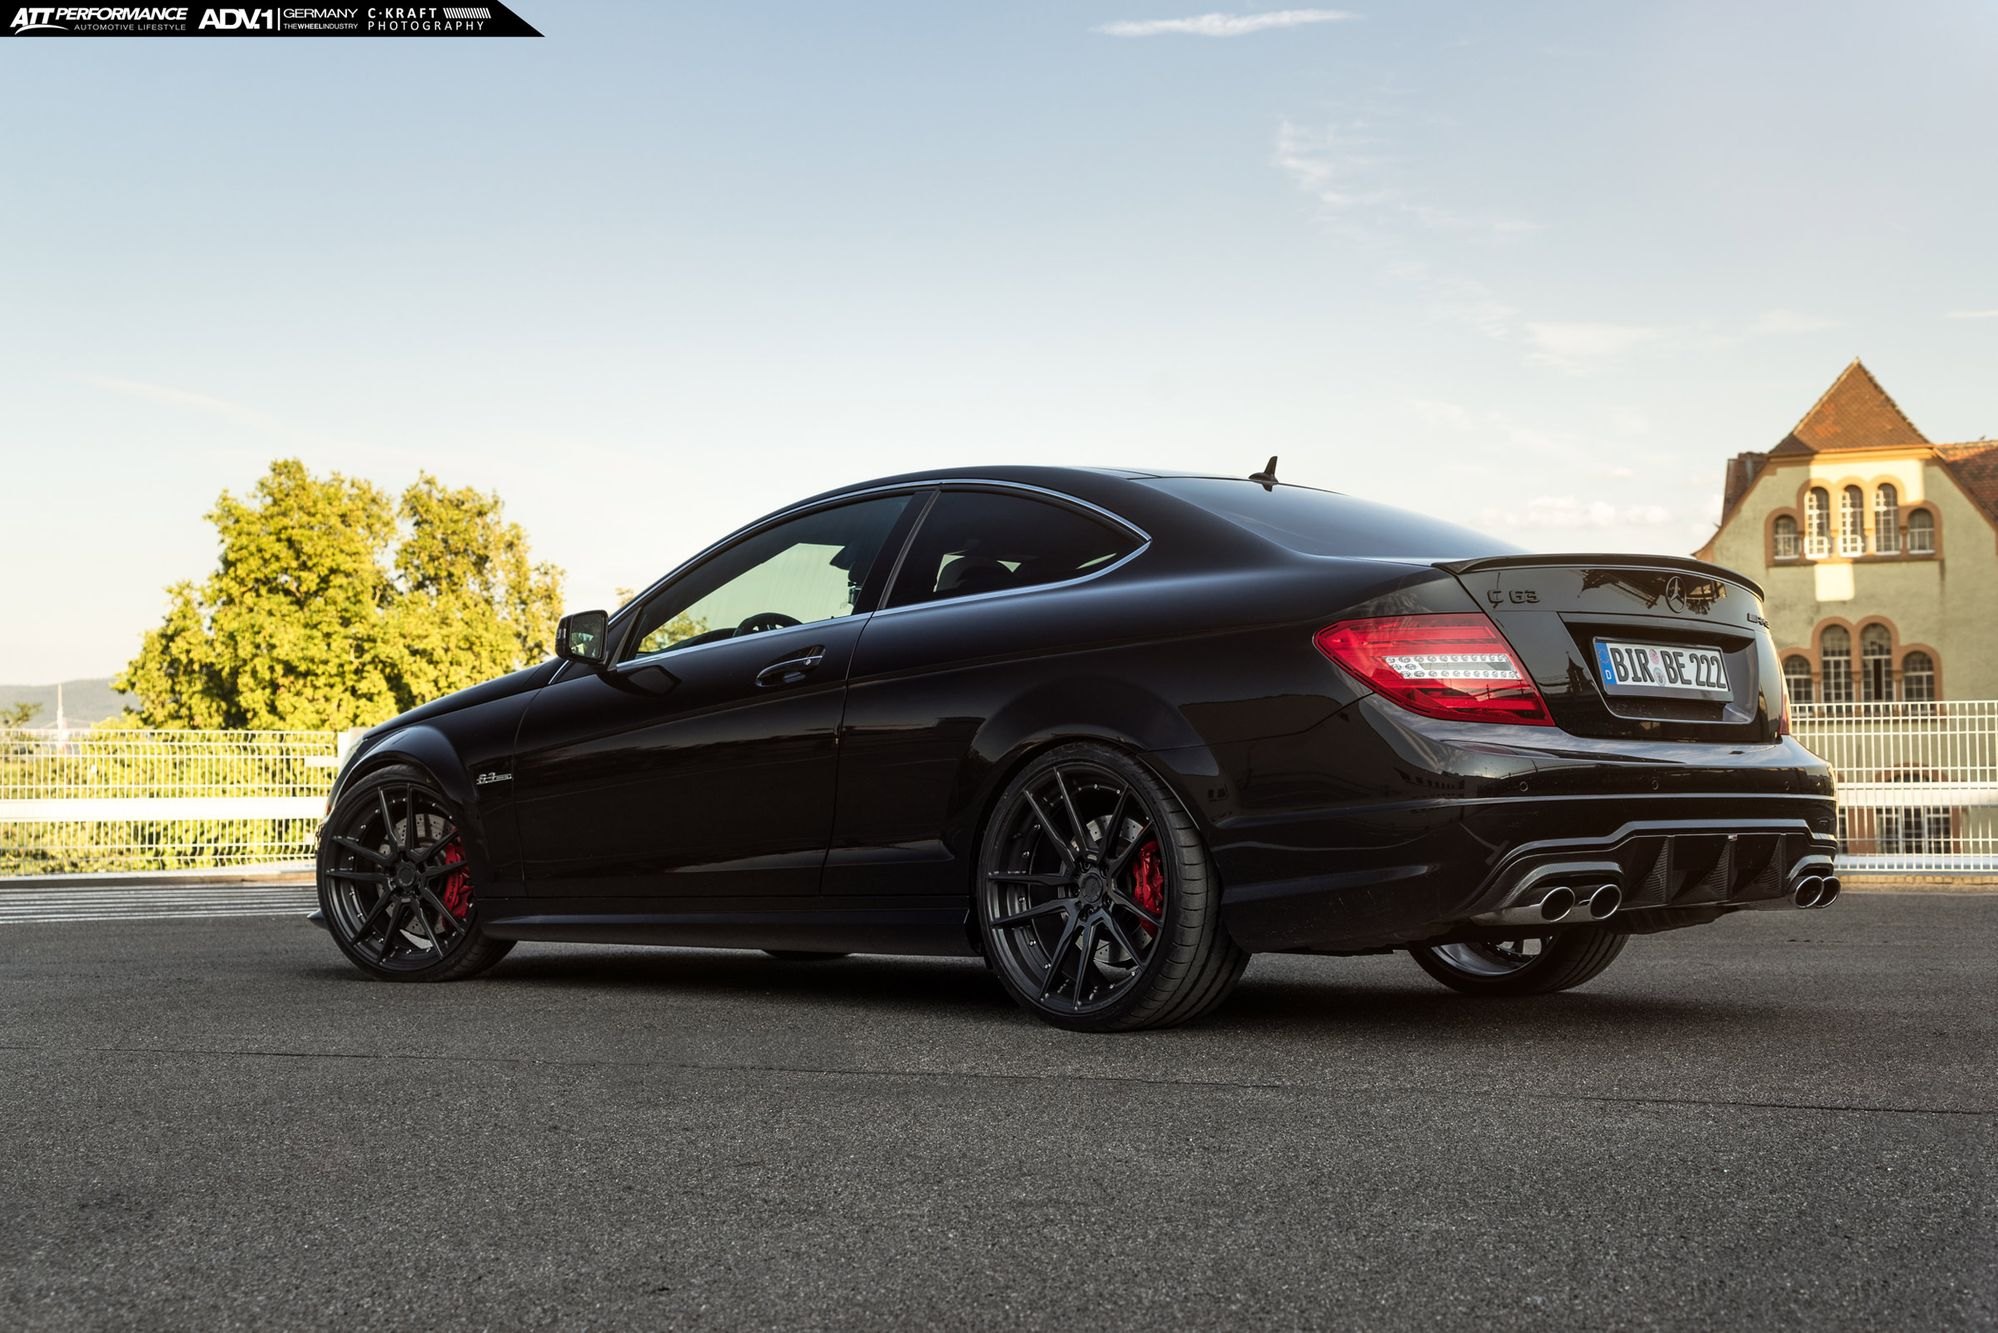 Mercedes C63 Coupe Rear Diffuser - Photo by ADV.1